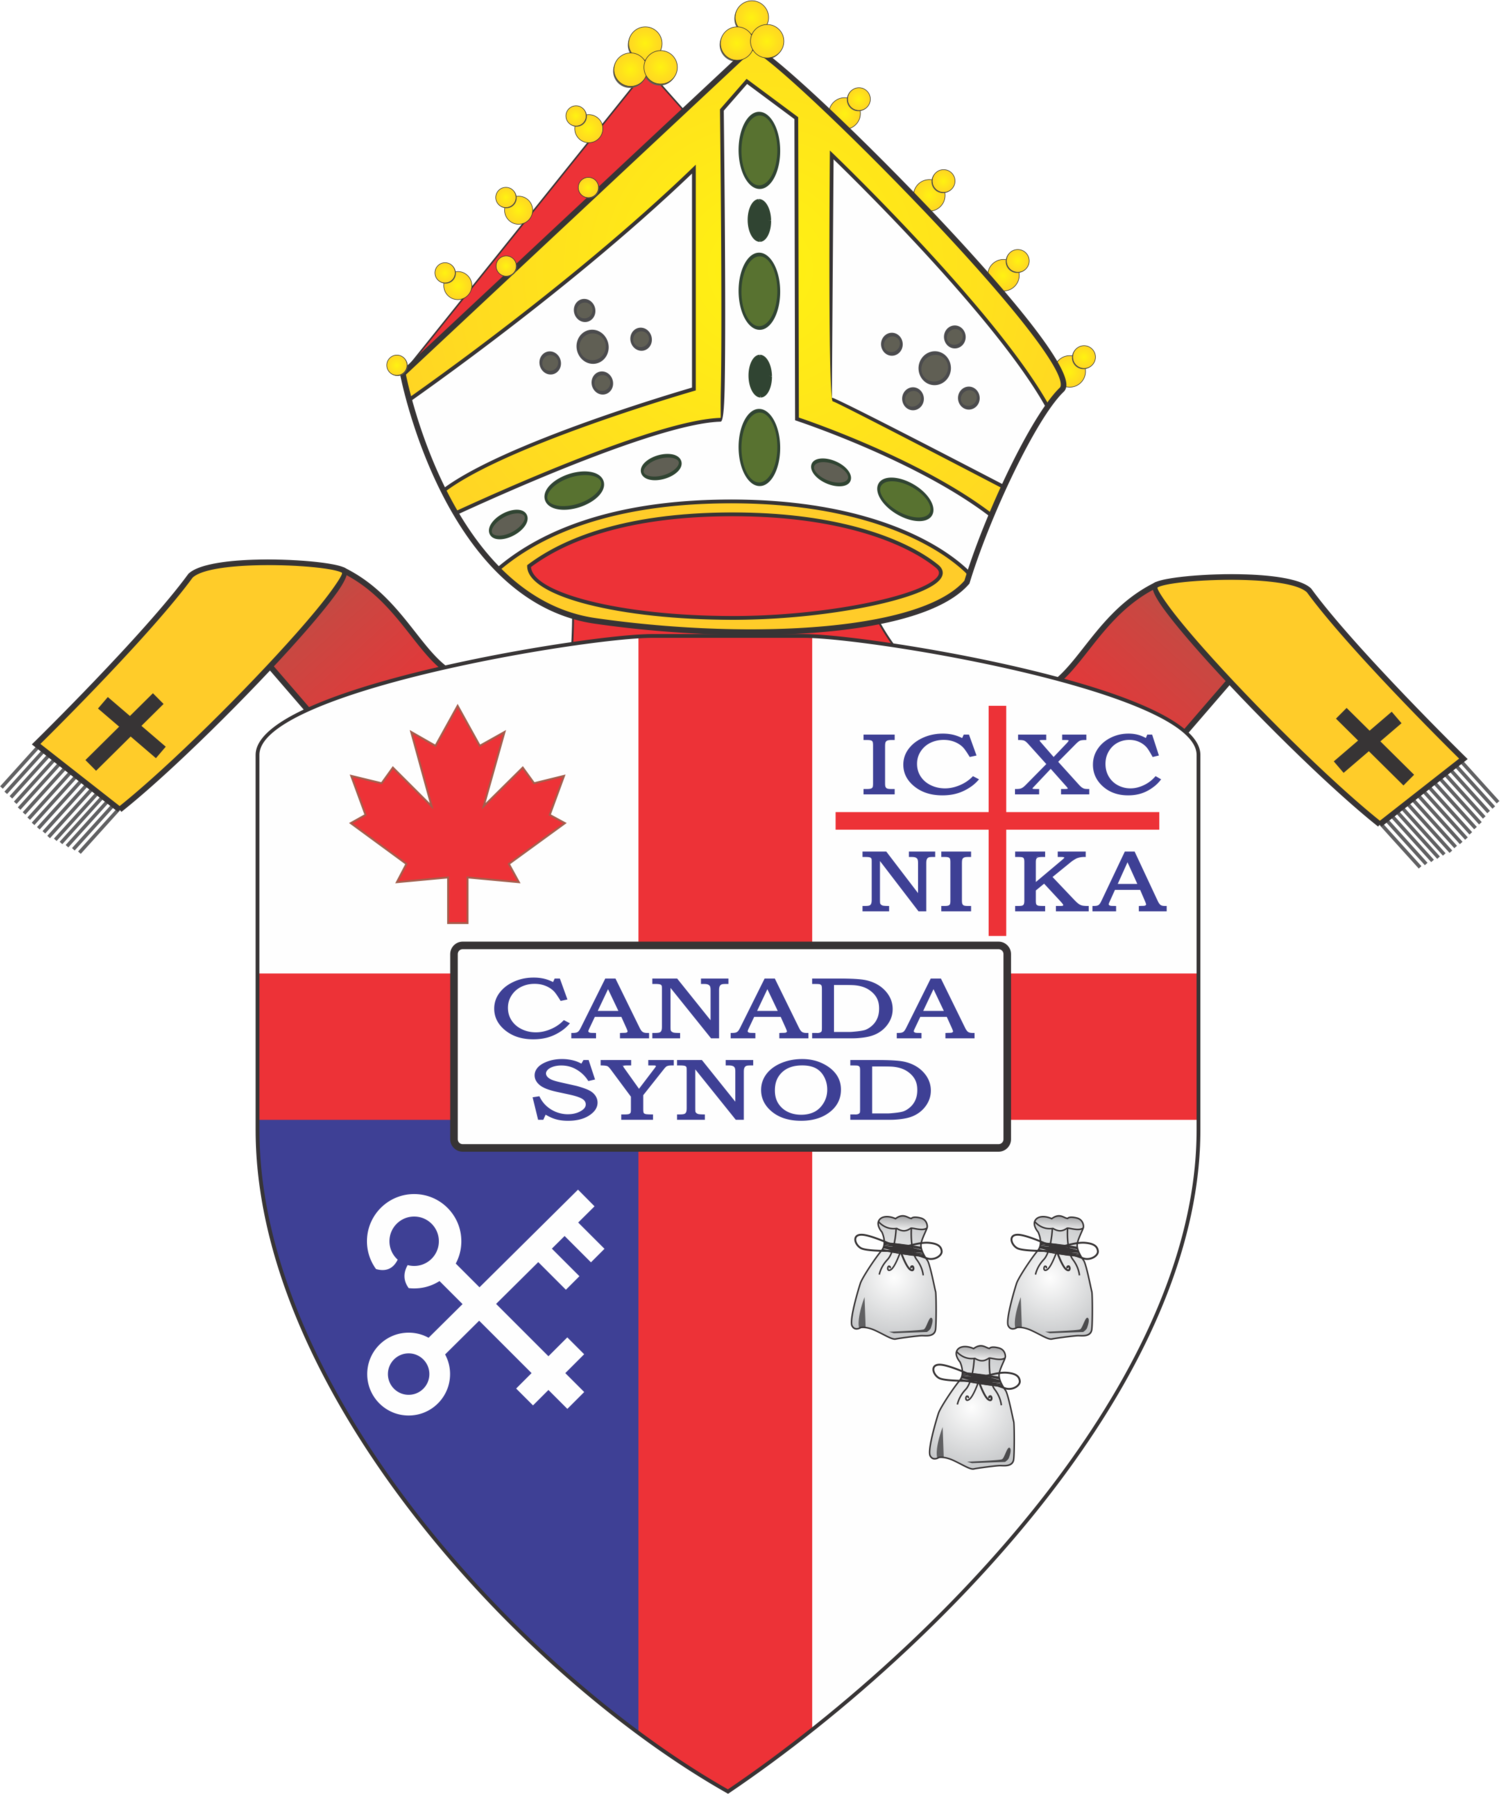 The Independent Anglican Church, Canada Synod 1934